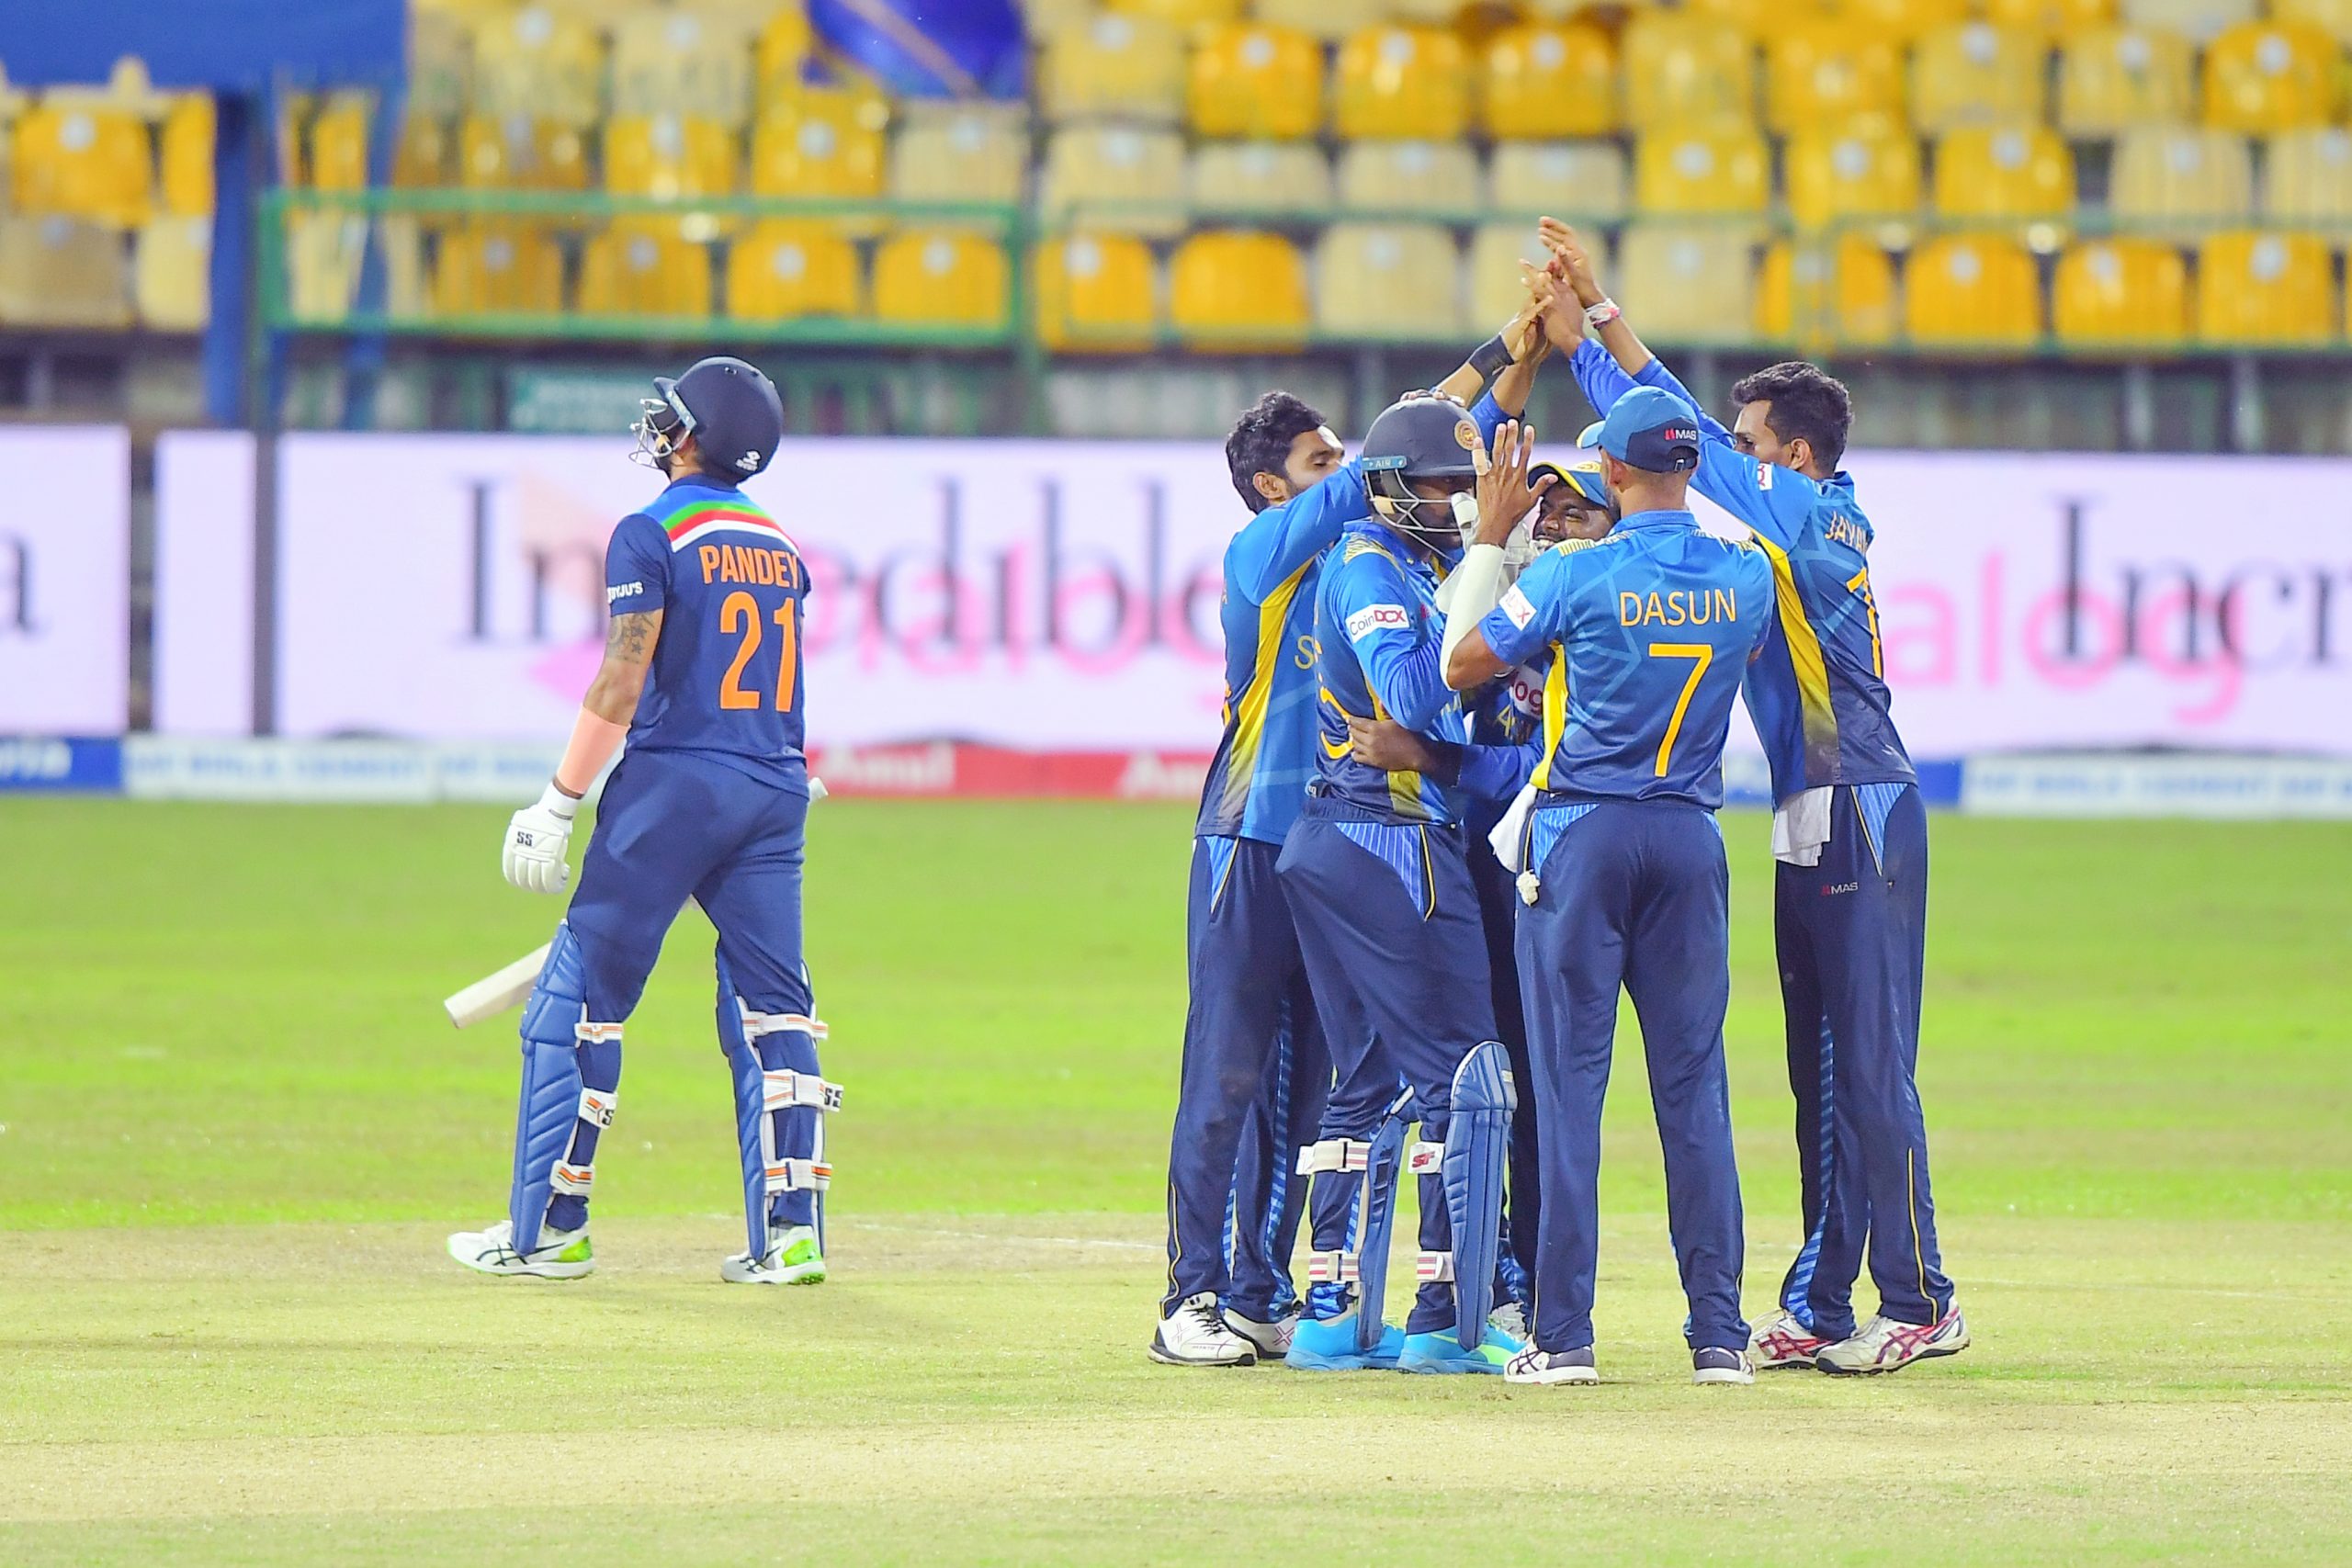 Young cast raised their hands in Sri Lanka breaking a hoodoo of losses